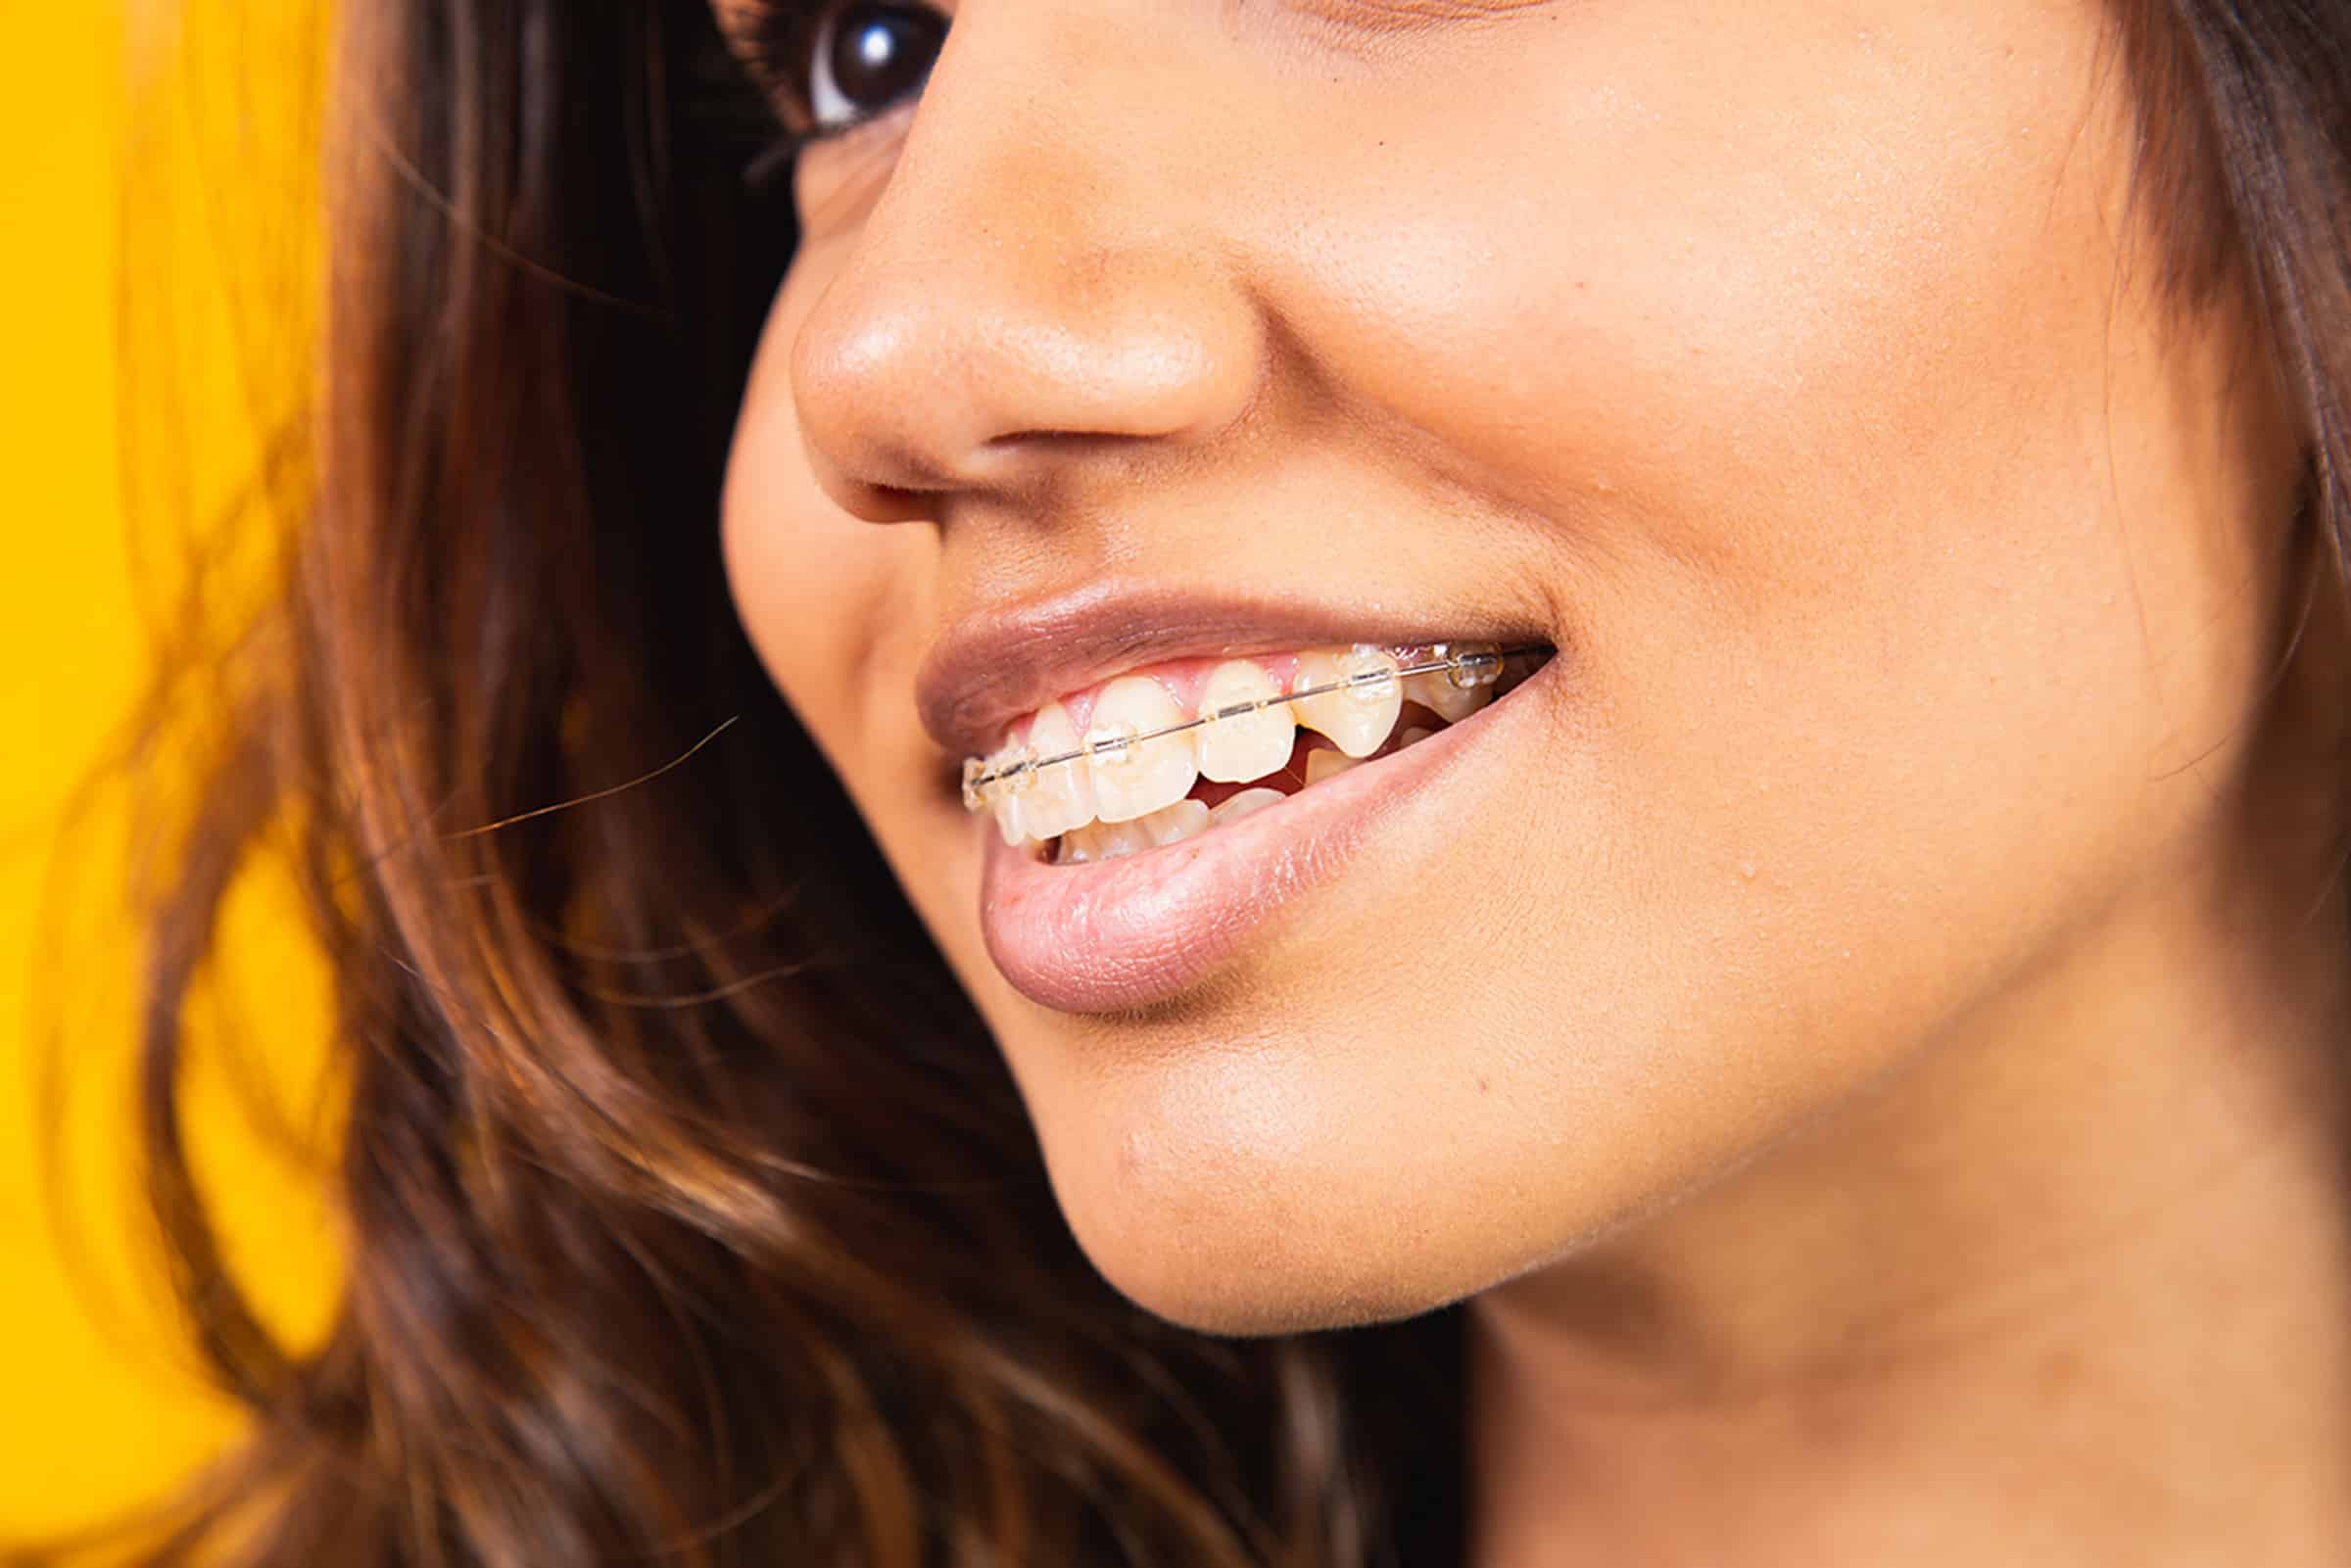 Woman smiling with ceramic braces orthodontic treatment in Midland, TX